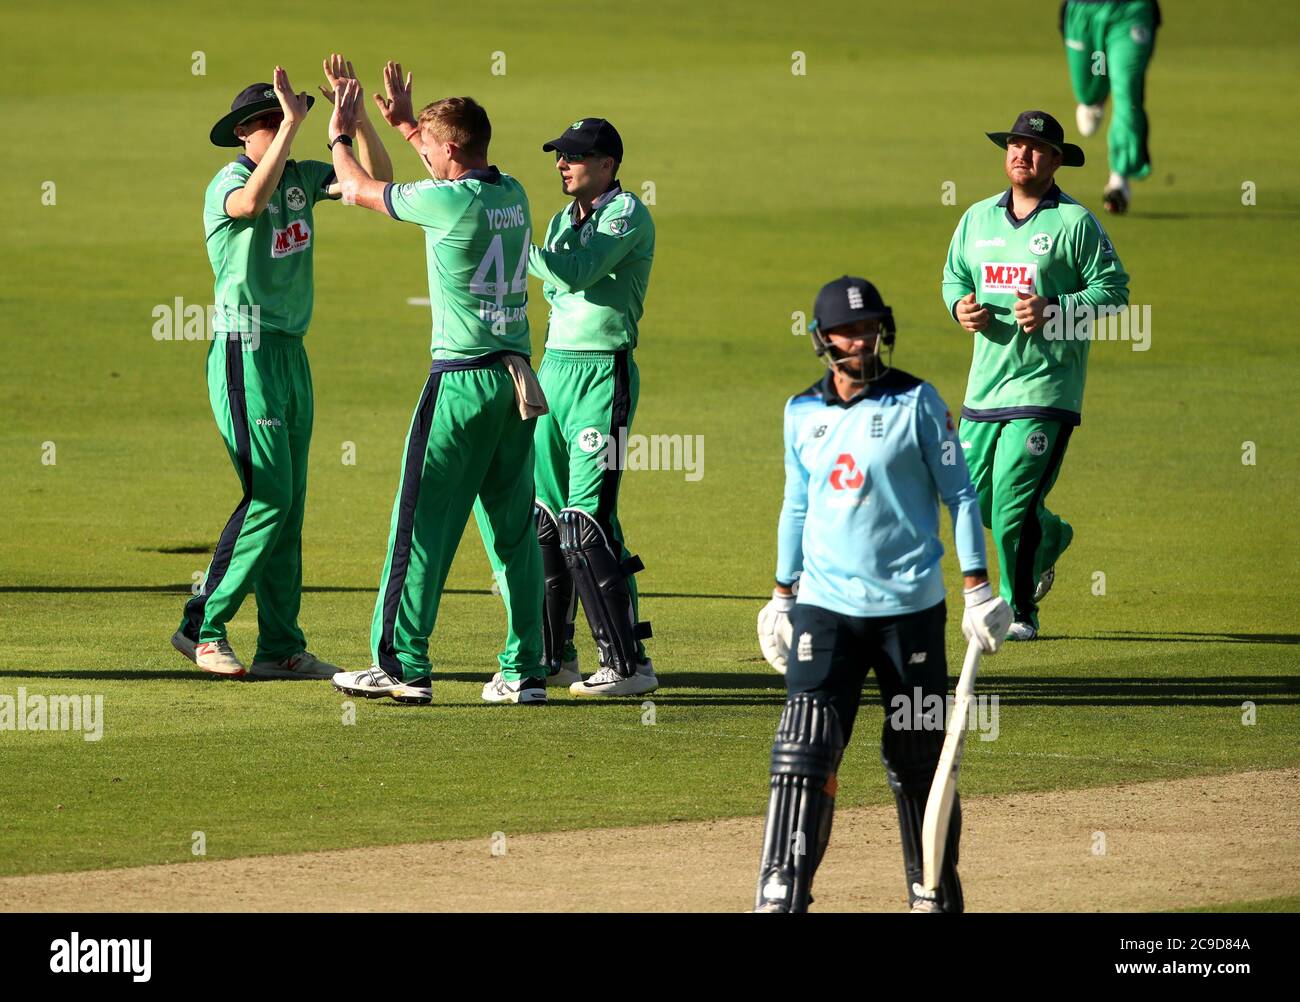 Ireland's Craig Young (second left) celebrates with team-mates after taking the wicket of England's James Vince during the First One Day International of the Royal London Series at the Ageas Bowl, Southampton. Stock Photo